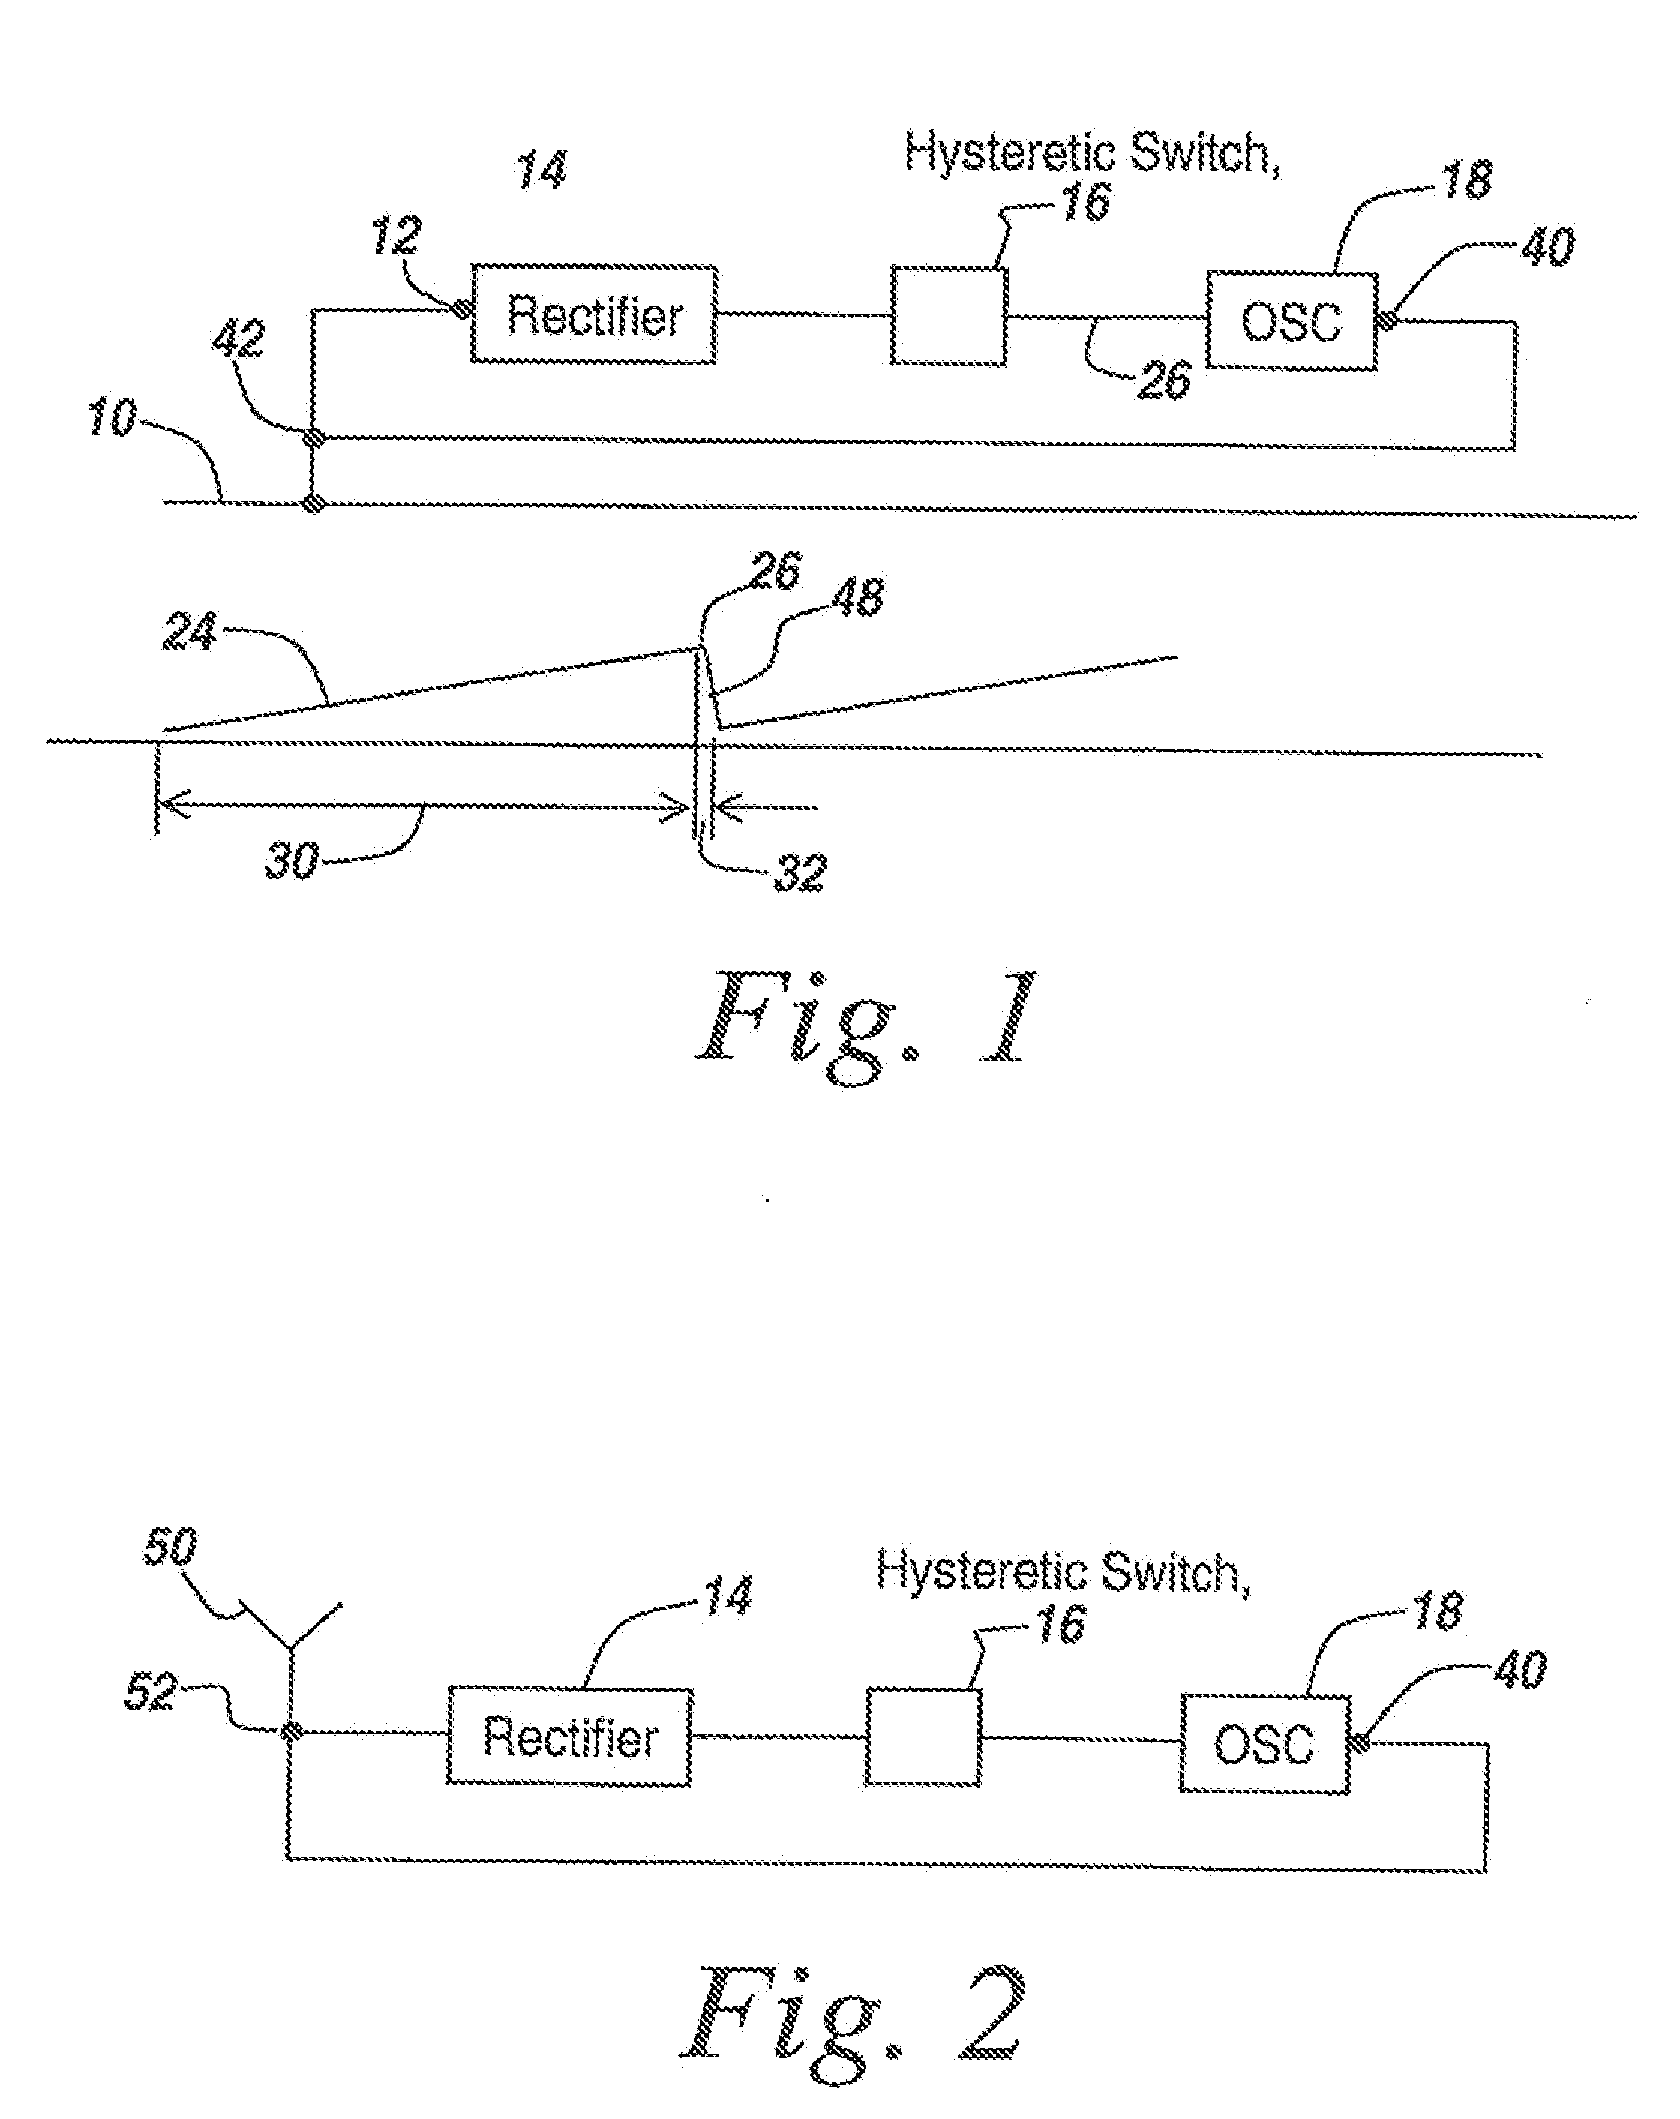 Method of tracking a container using microradios